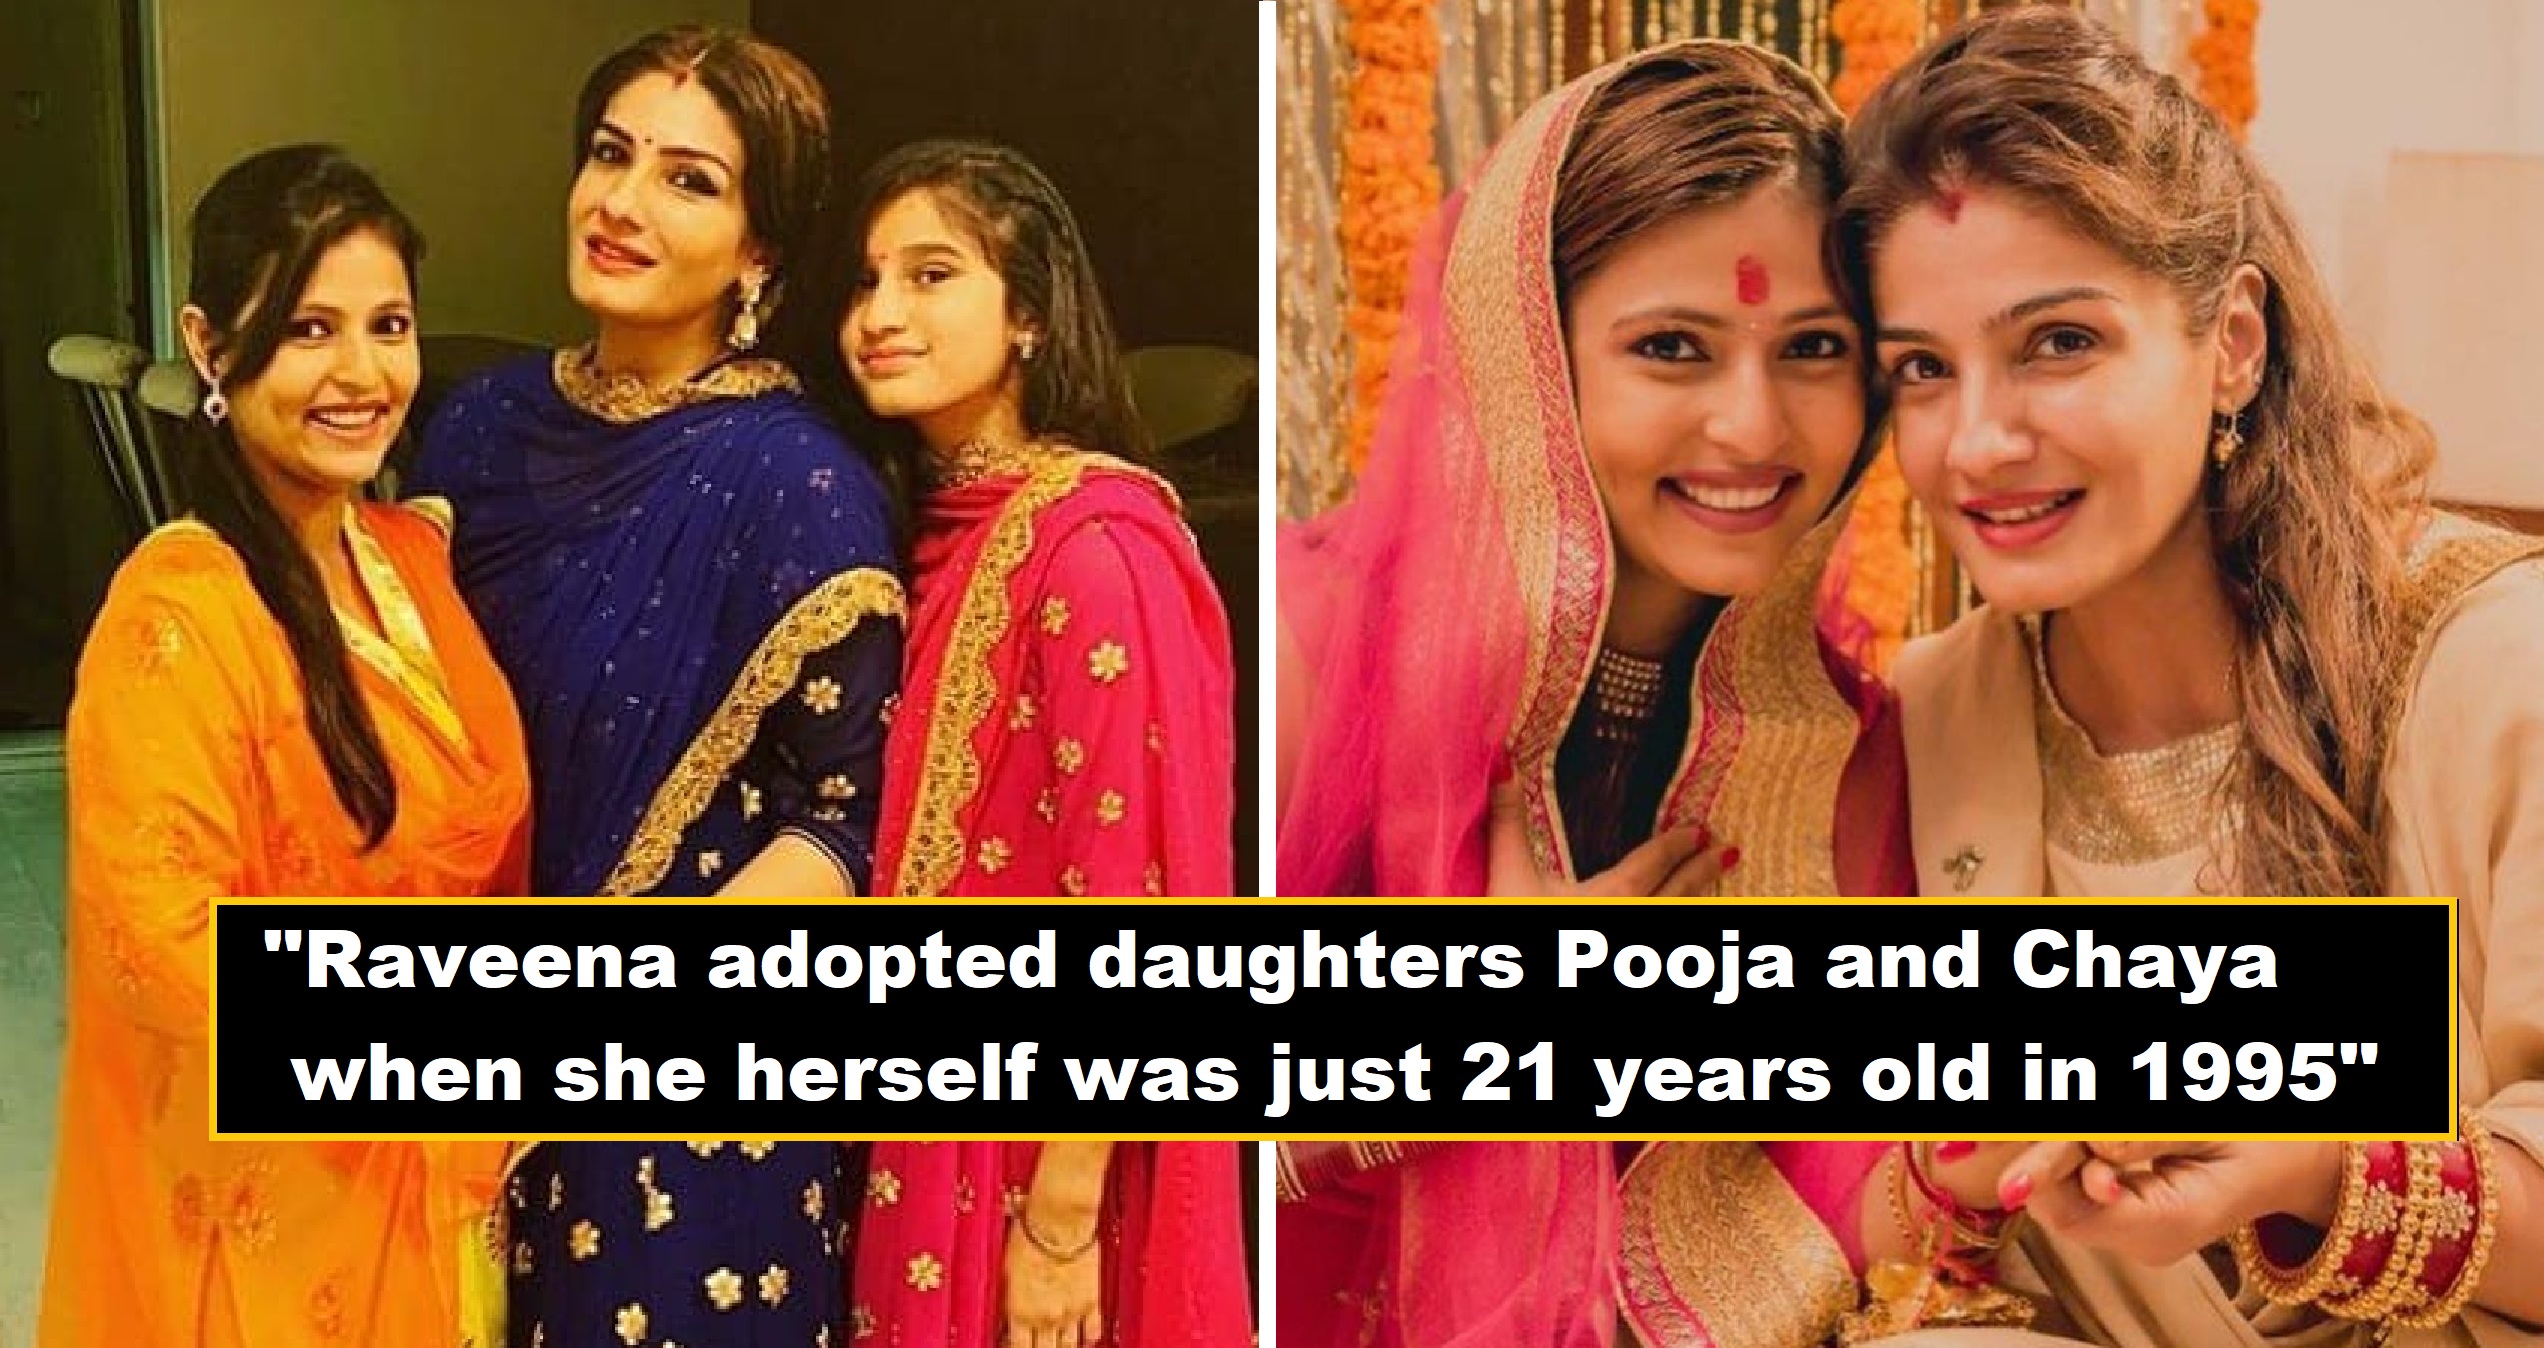 Raveena Tandon Wishes Daughter On Her Birthday In Heartwarming Post, “You make my heart swell with pride”